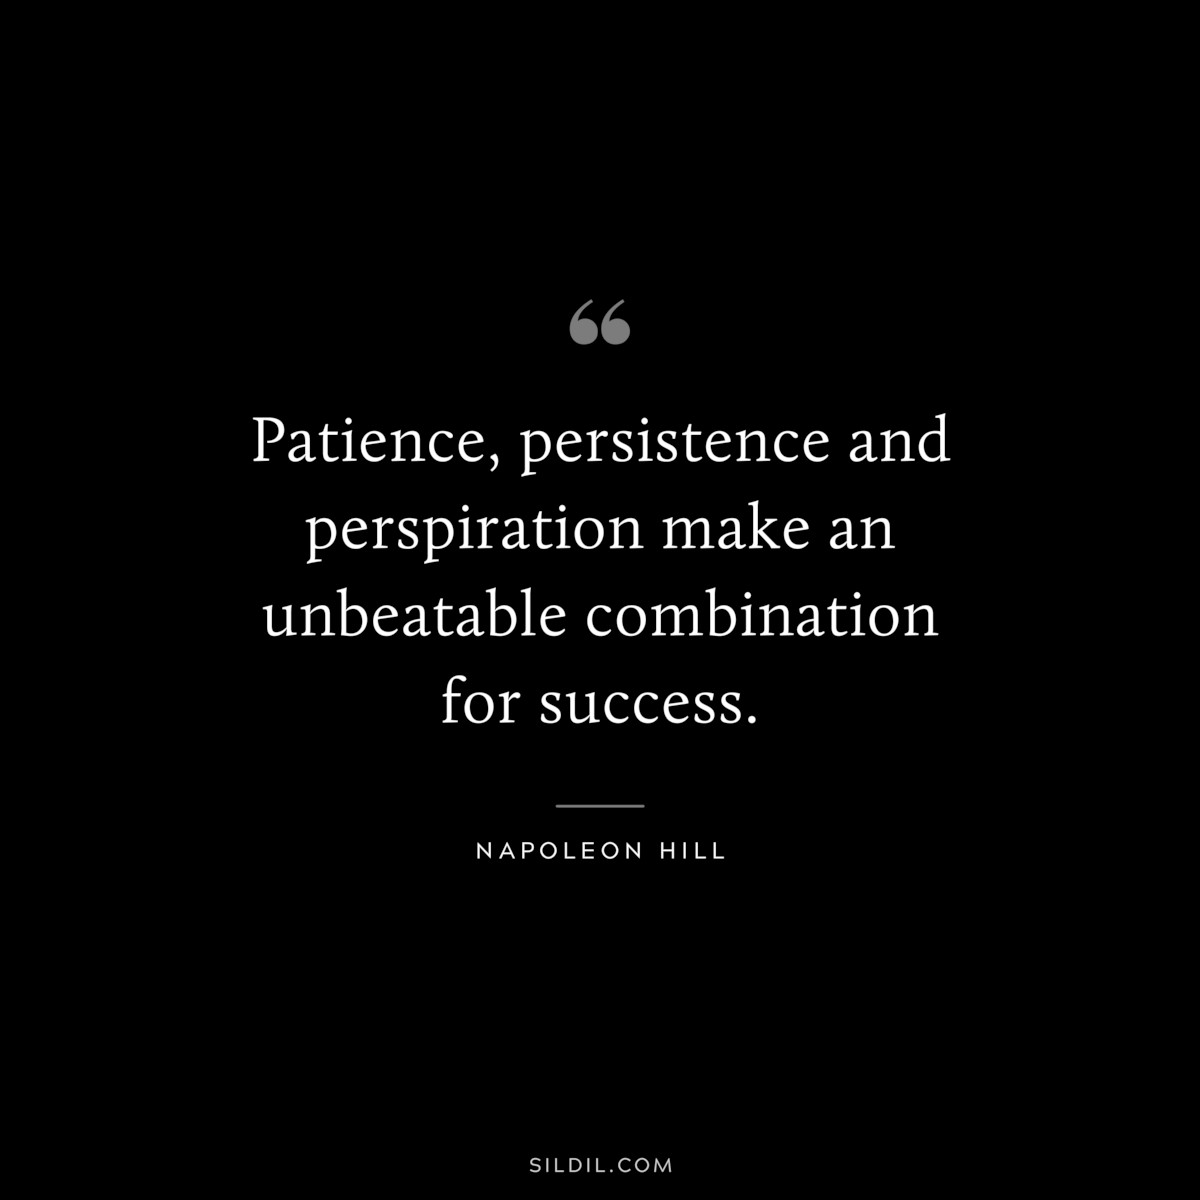 Patience, persistence and perspiration make an unbeatable combination for success. ― Napoleon Hill